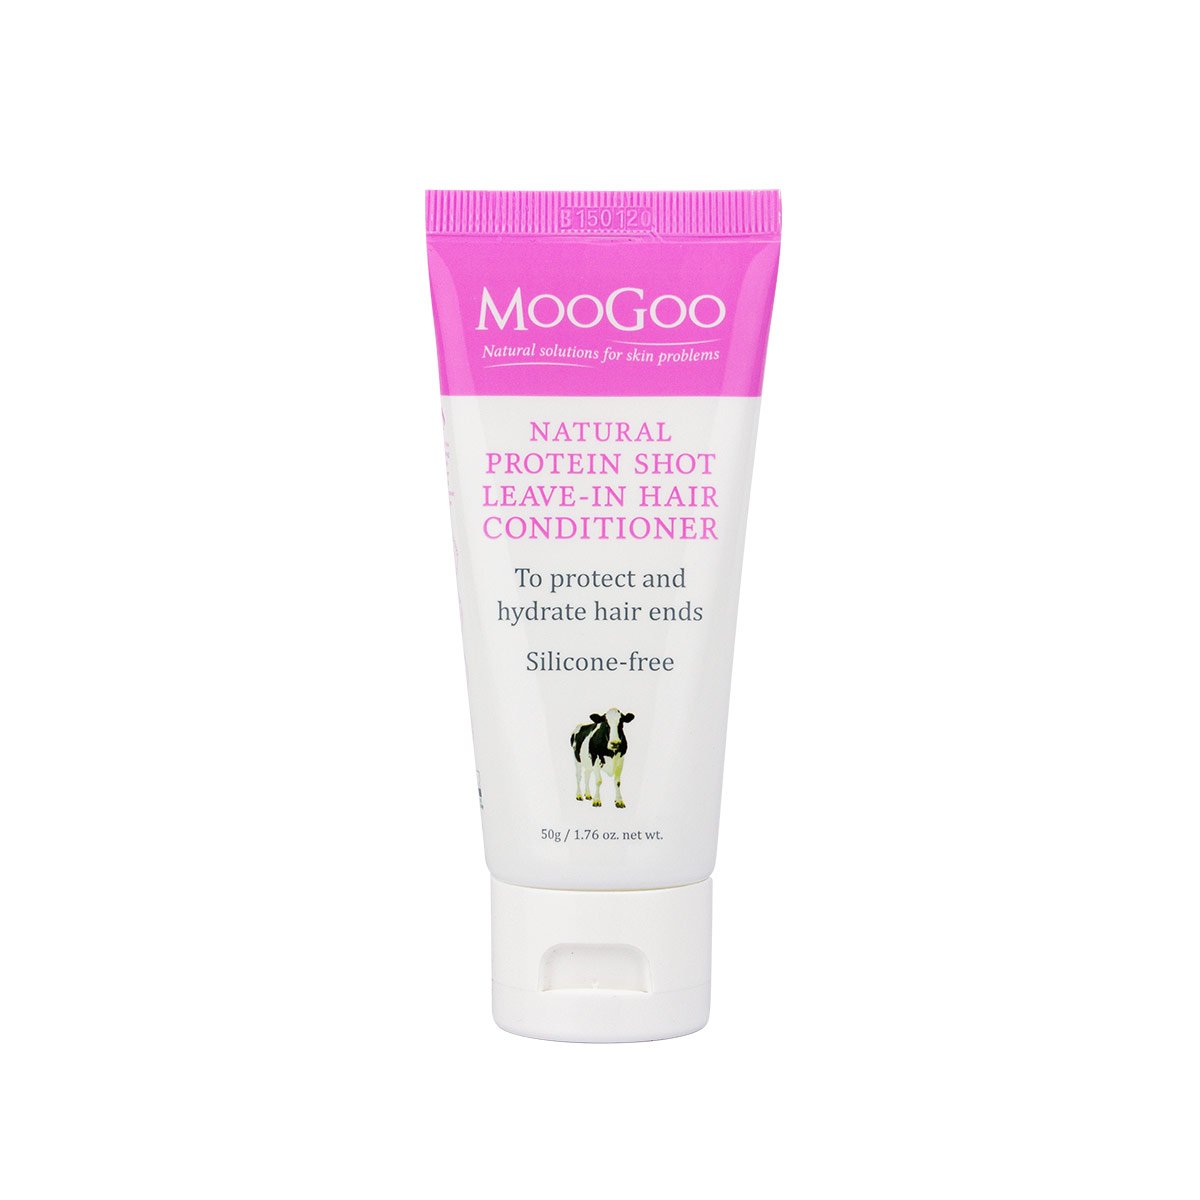 Moogoo Protein Shot Leave-in Conditioner